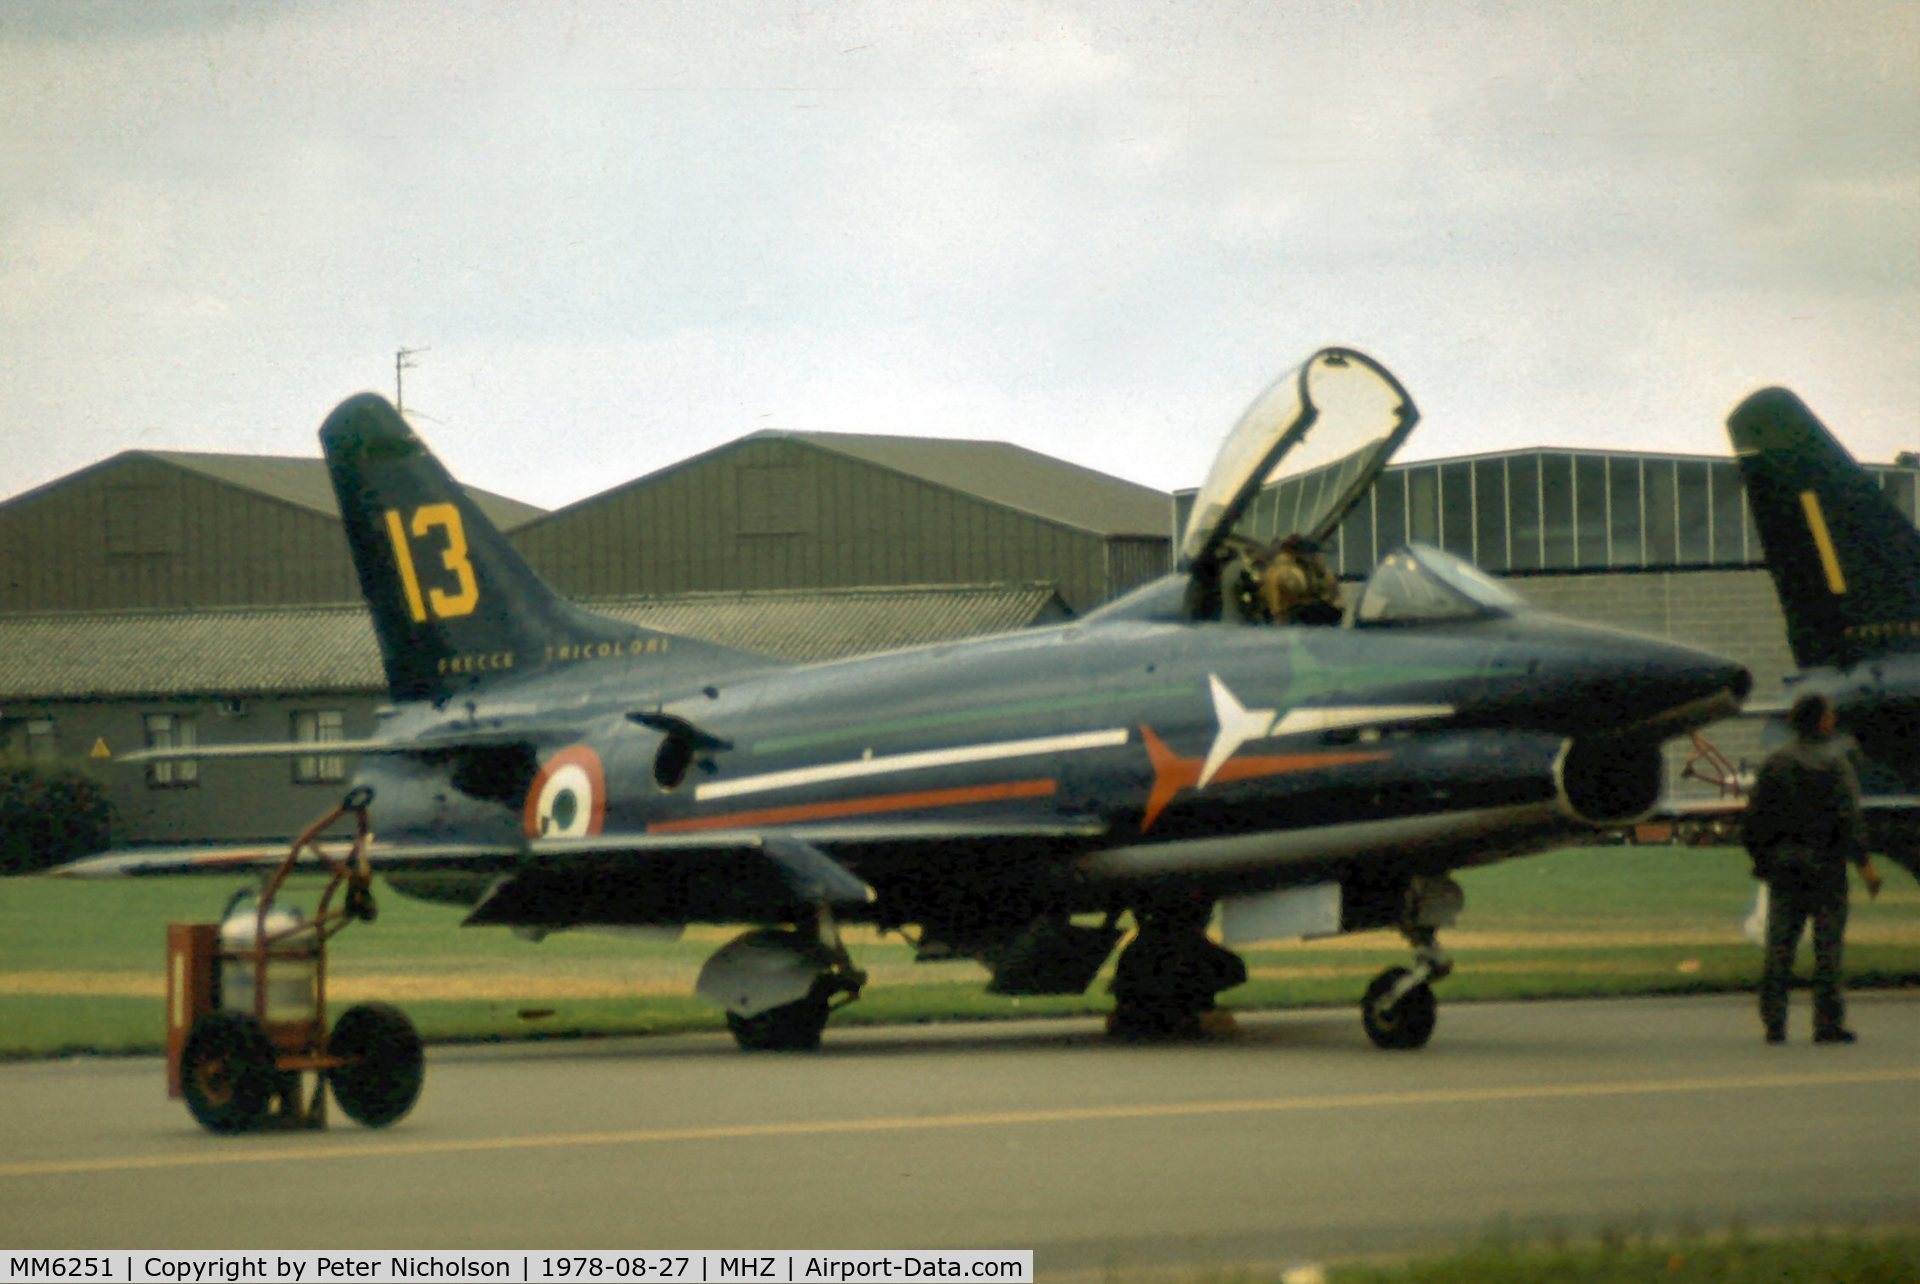 MM6251, Fiat G-91PAN C/N 17, G-91PAN of the Italian Air Force's Frecce Tricolori display team at the 1978 Mildenhall Air Fete.